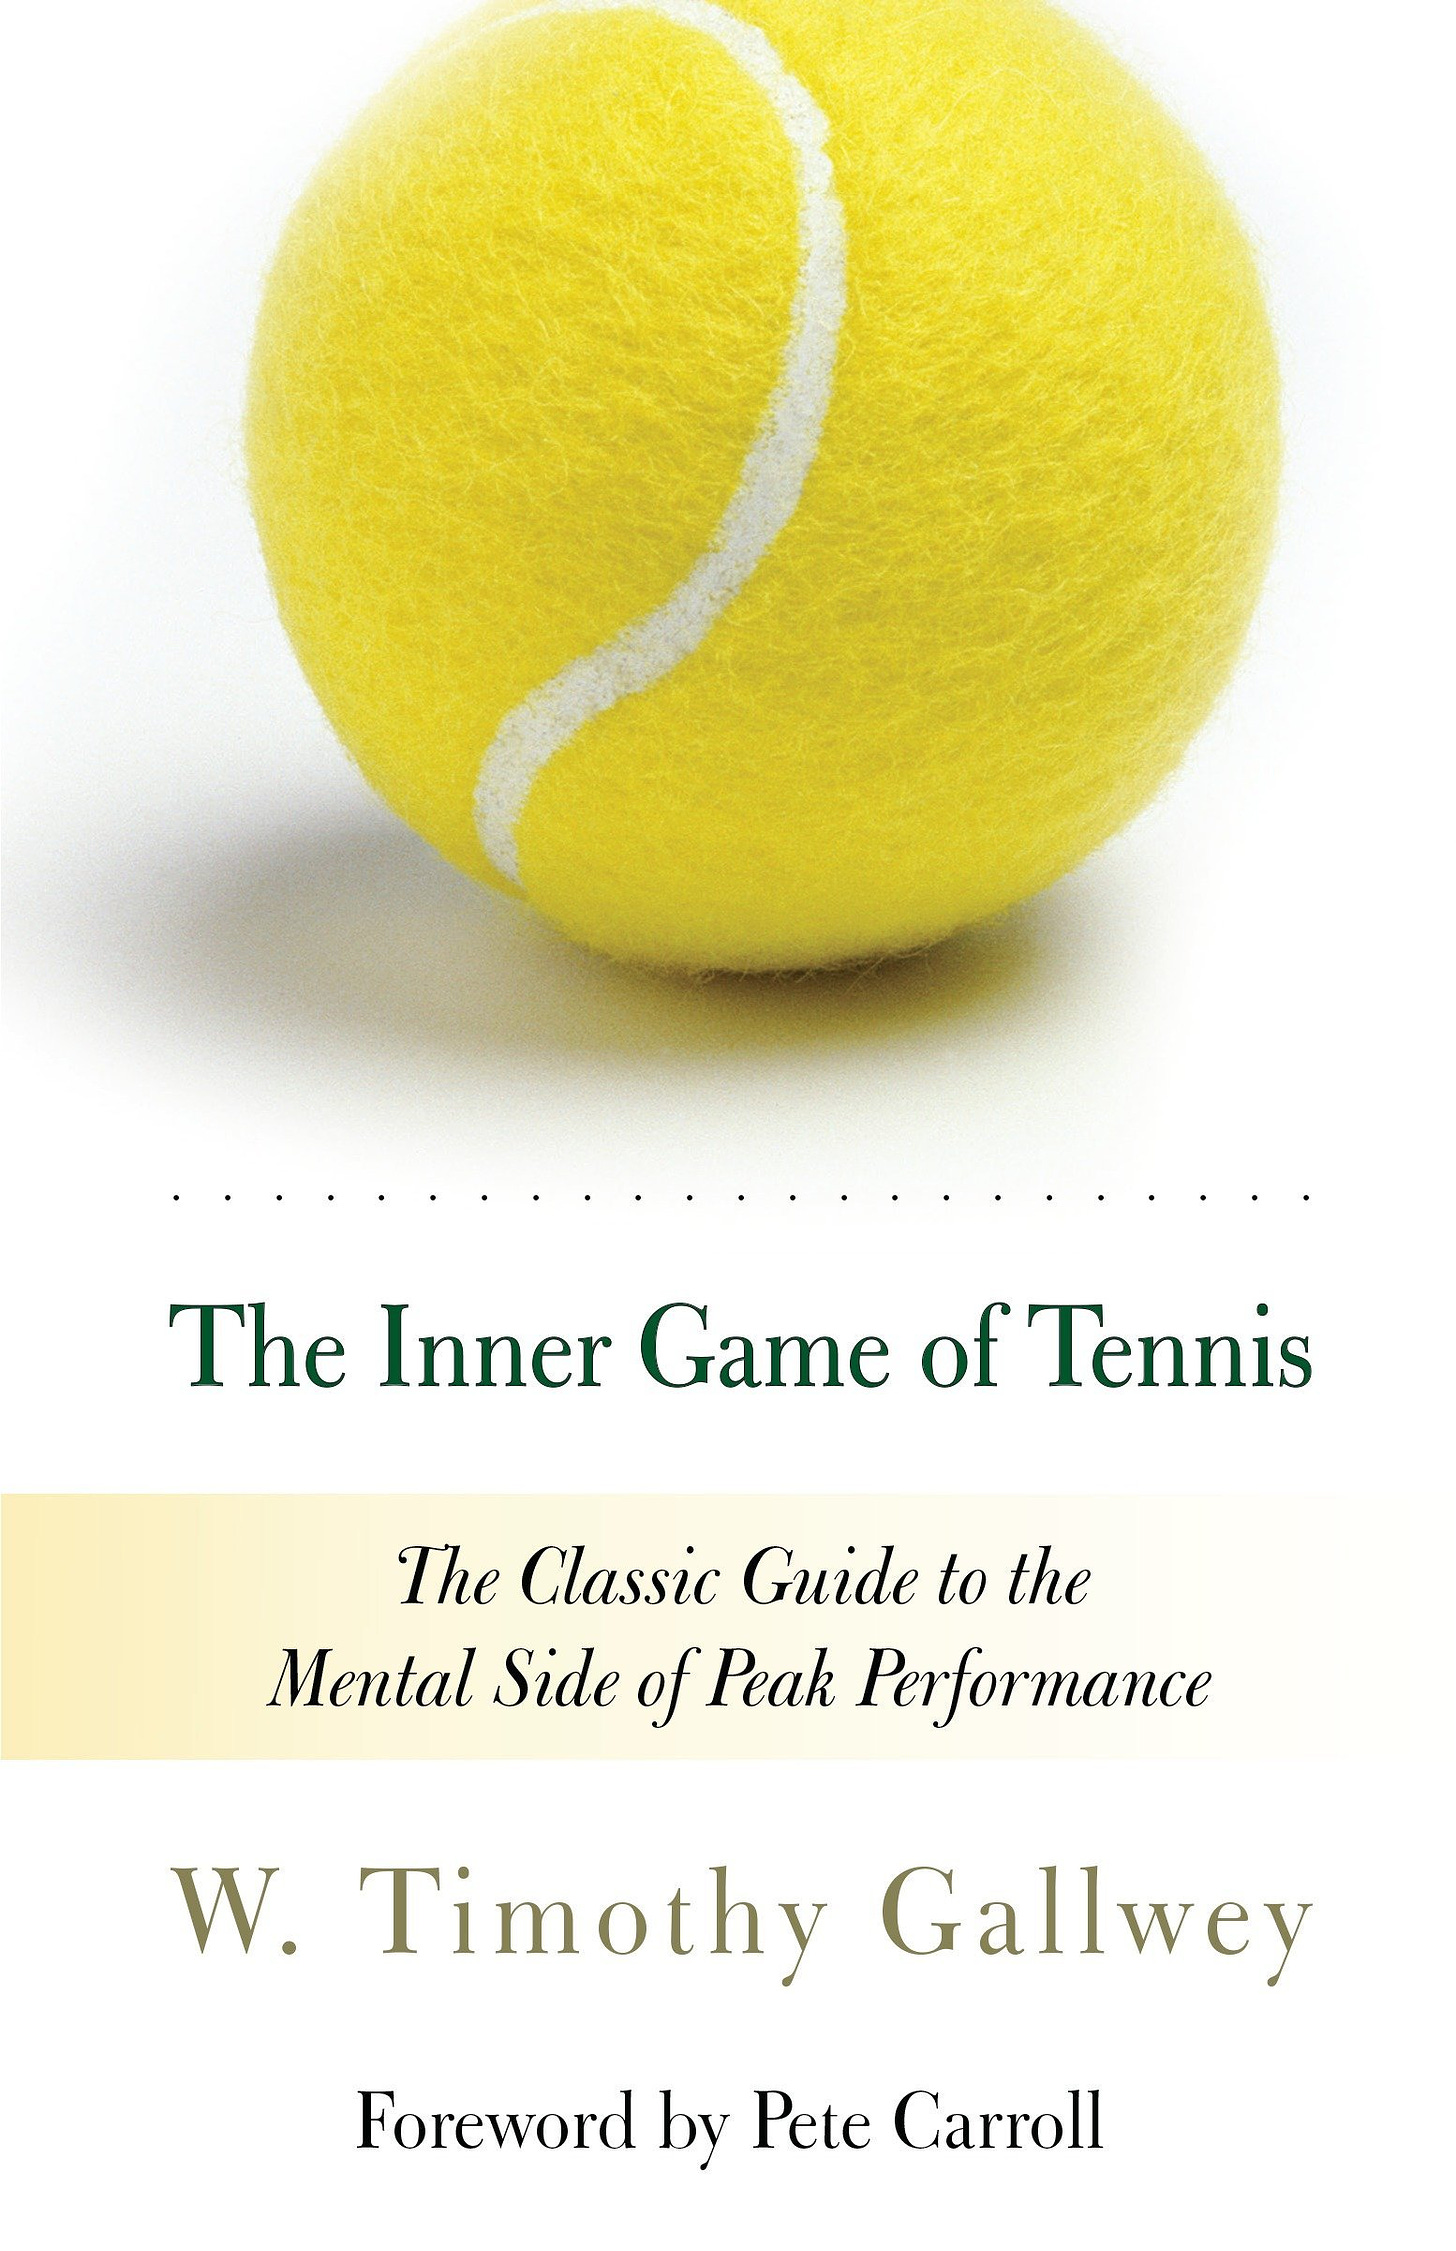 The Inner Game of Tennis - What You Will Learn